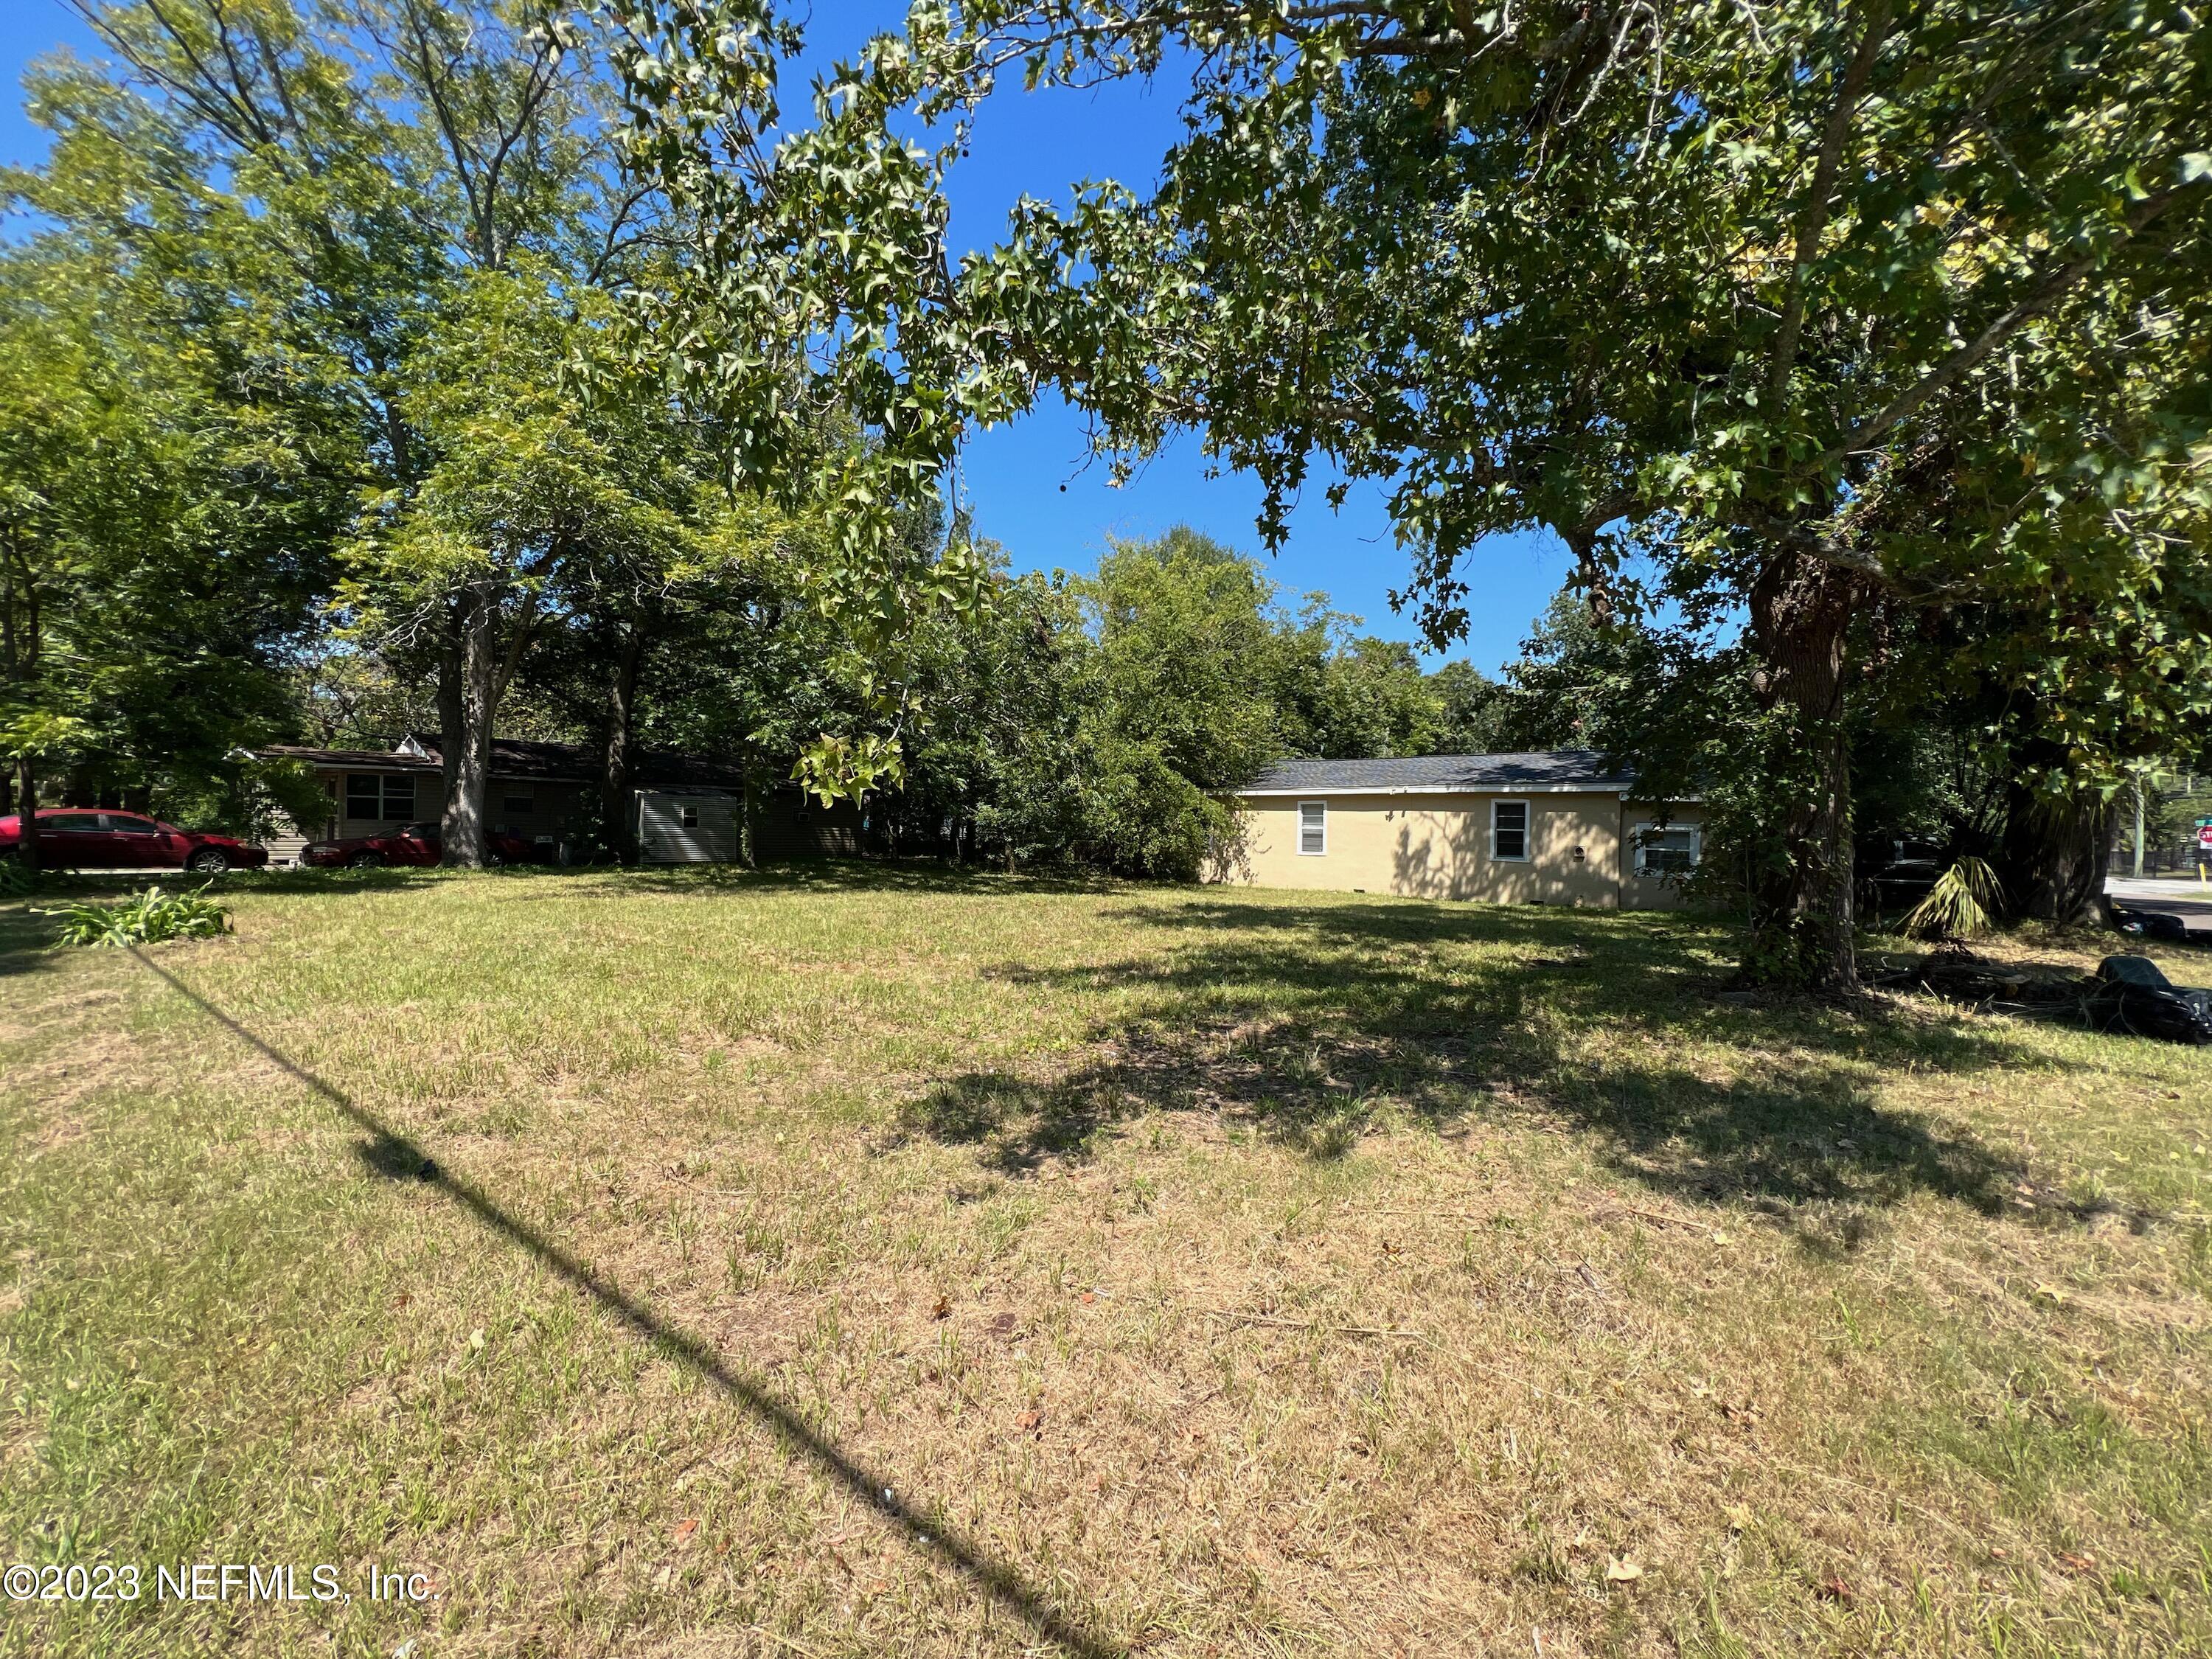 Jacksonville, FL home for sale located at 0 W 12TH Street, Jacksonville, FL 32206